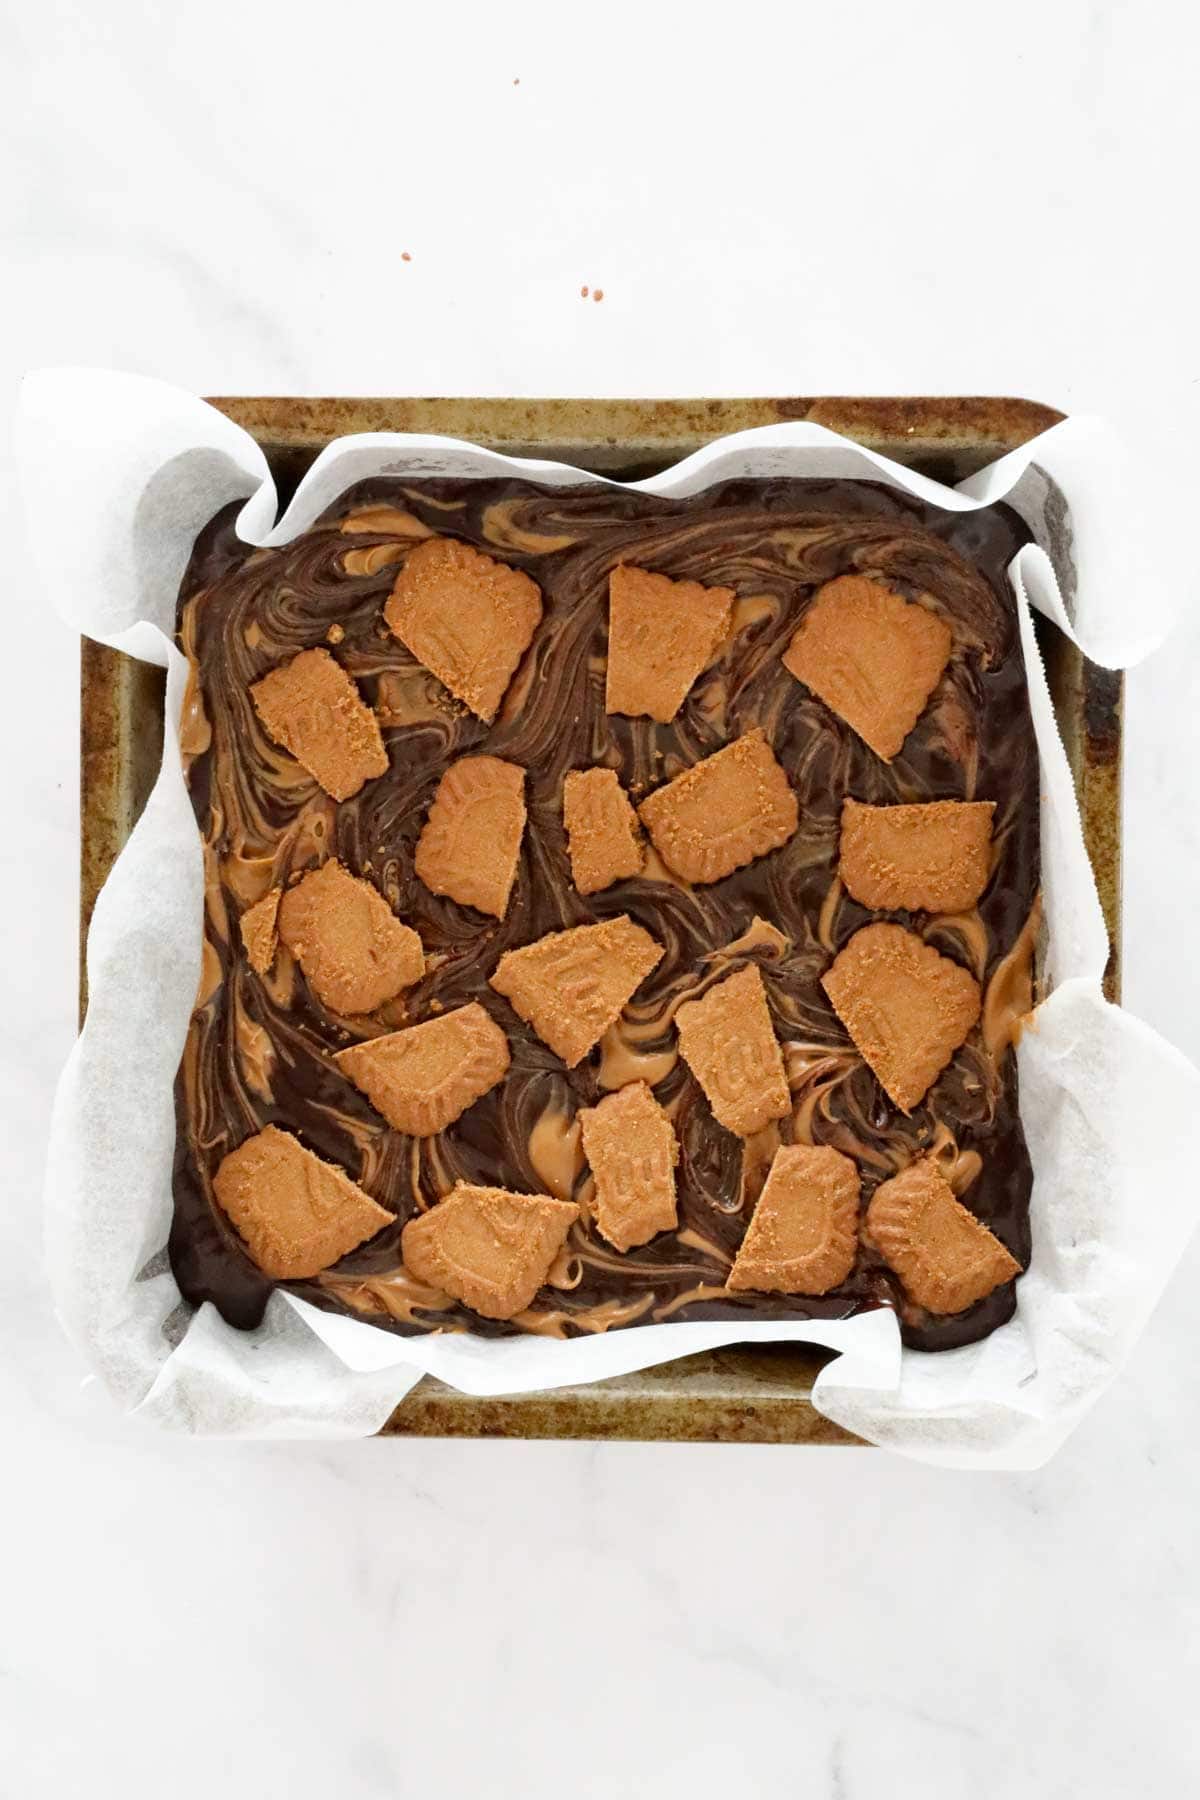 Chunks of Biscoff biscuit placed on top of slice before baking.